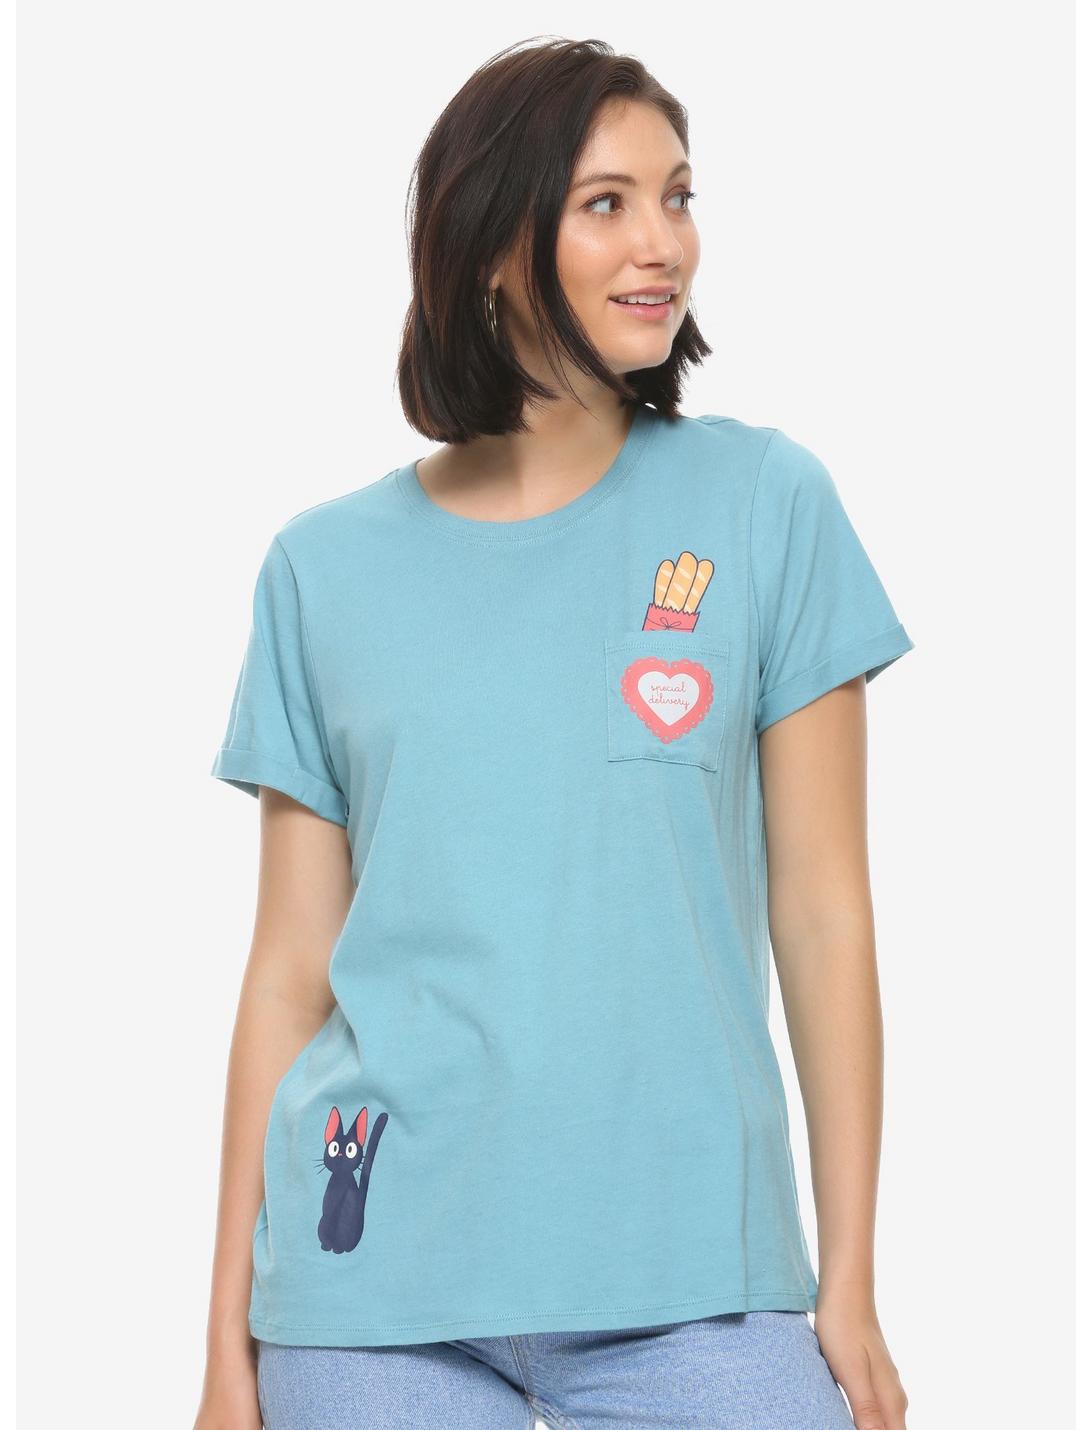 Her Universe Studio Ghibli Kiki's Delivery Service Pocket Women's T-Shirt - BoxLunch Exclusive, BLUE, hi-res